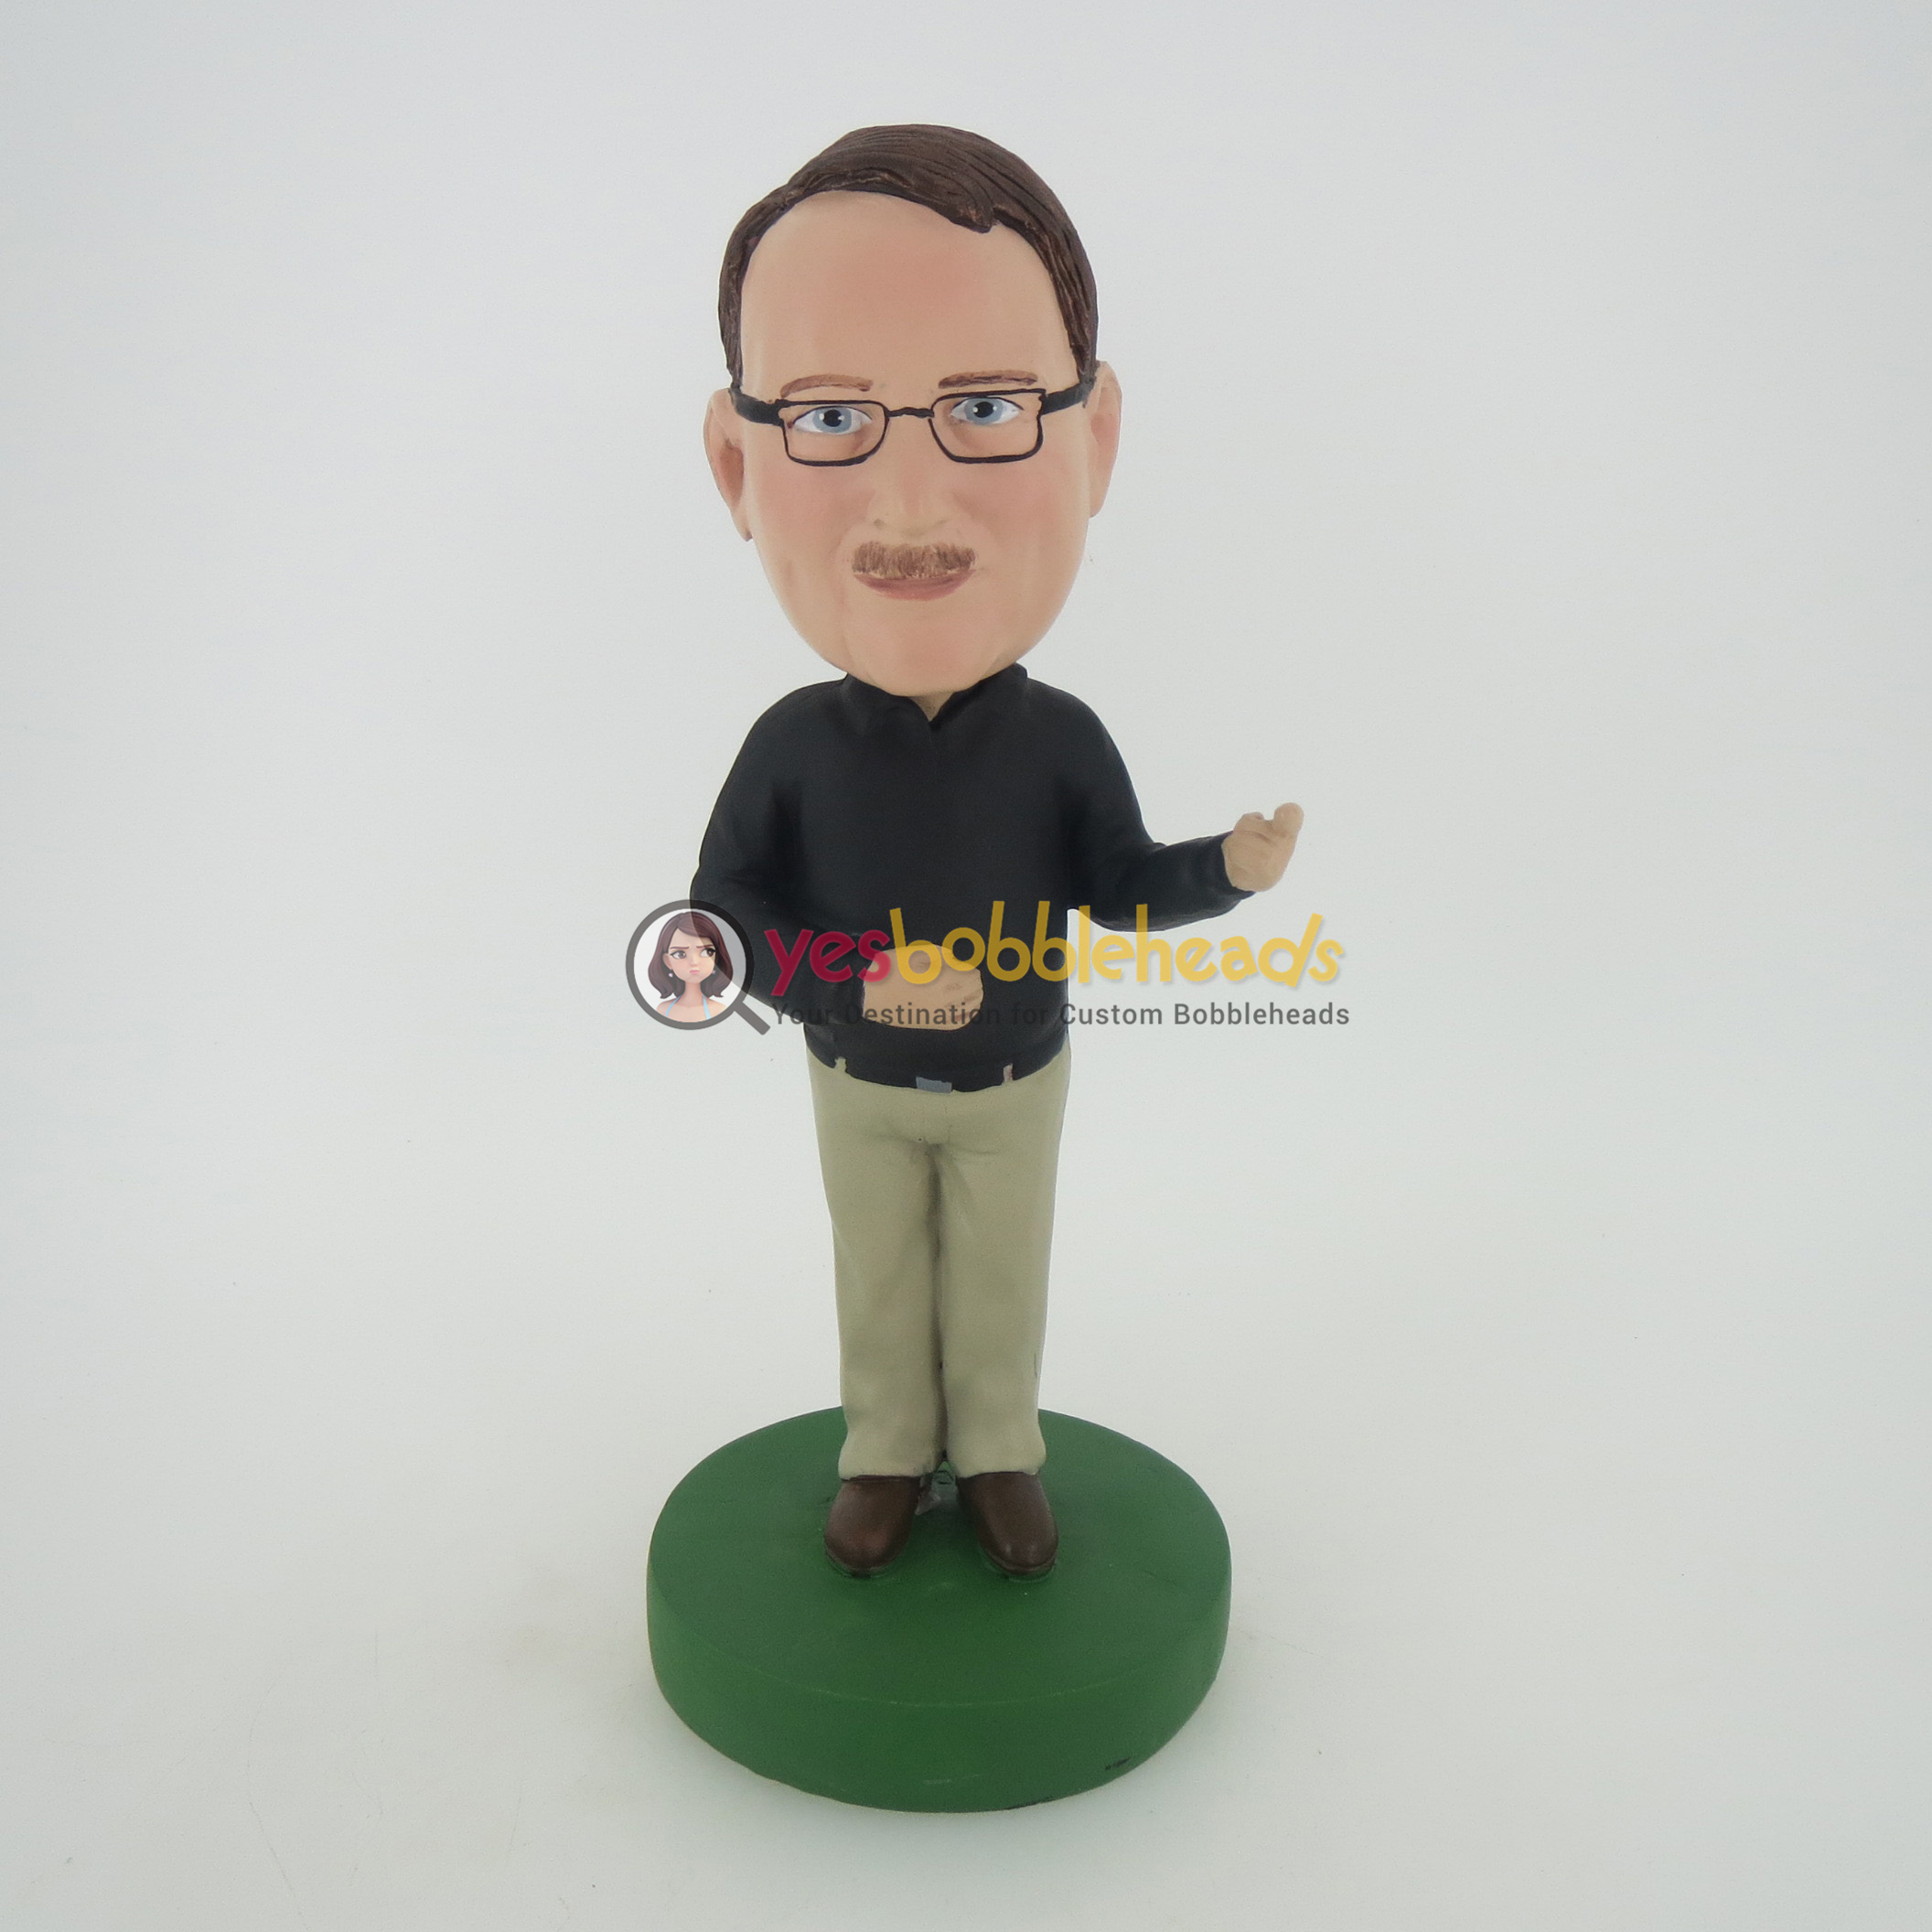 Picture of Custom Bobblehead Doll: Kind Man Welcoming You